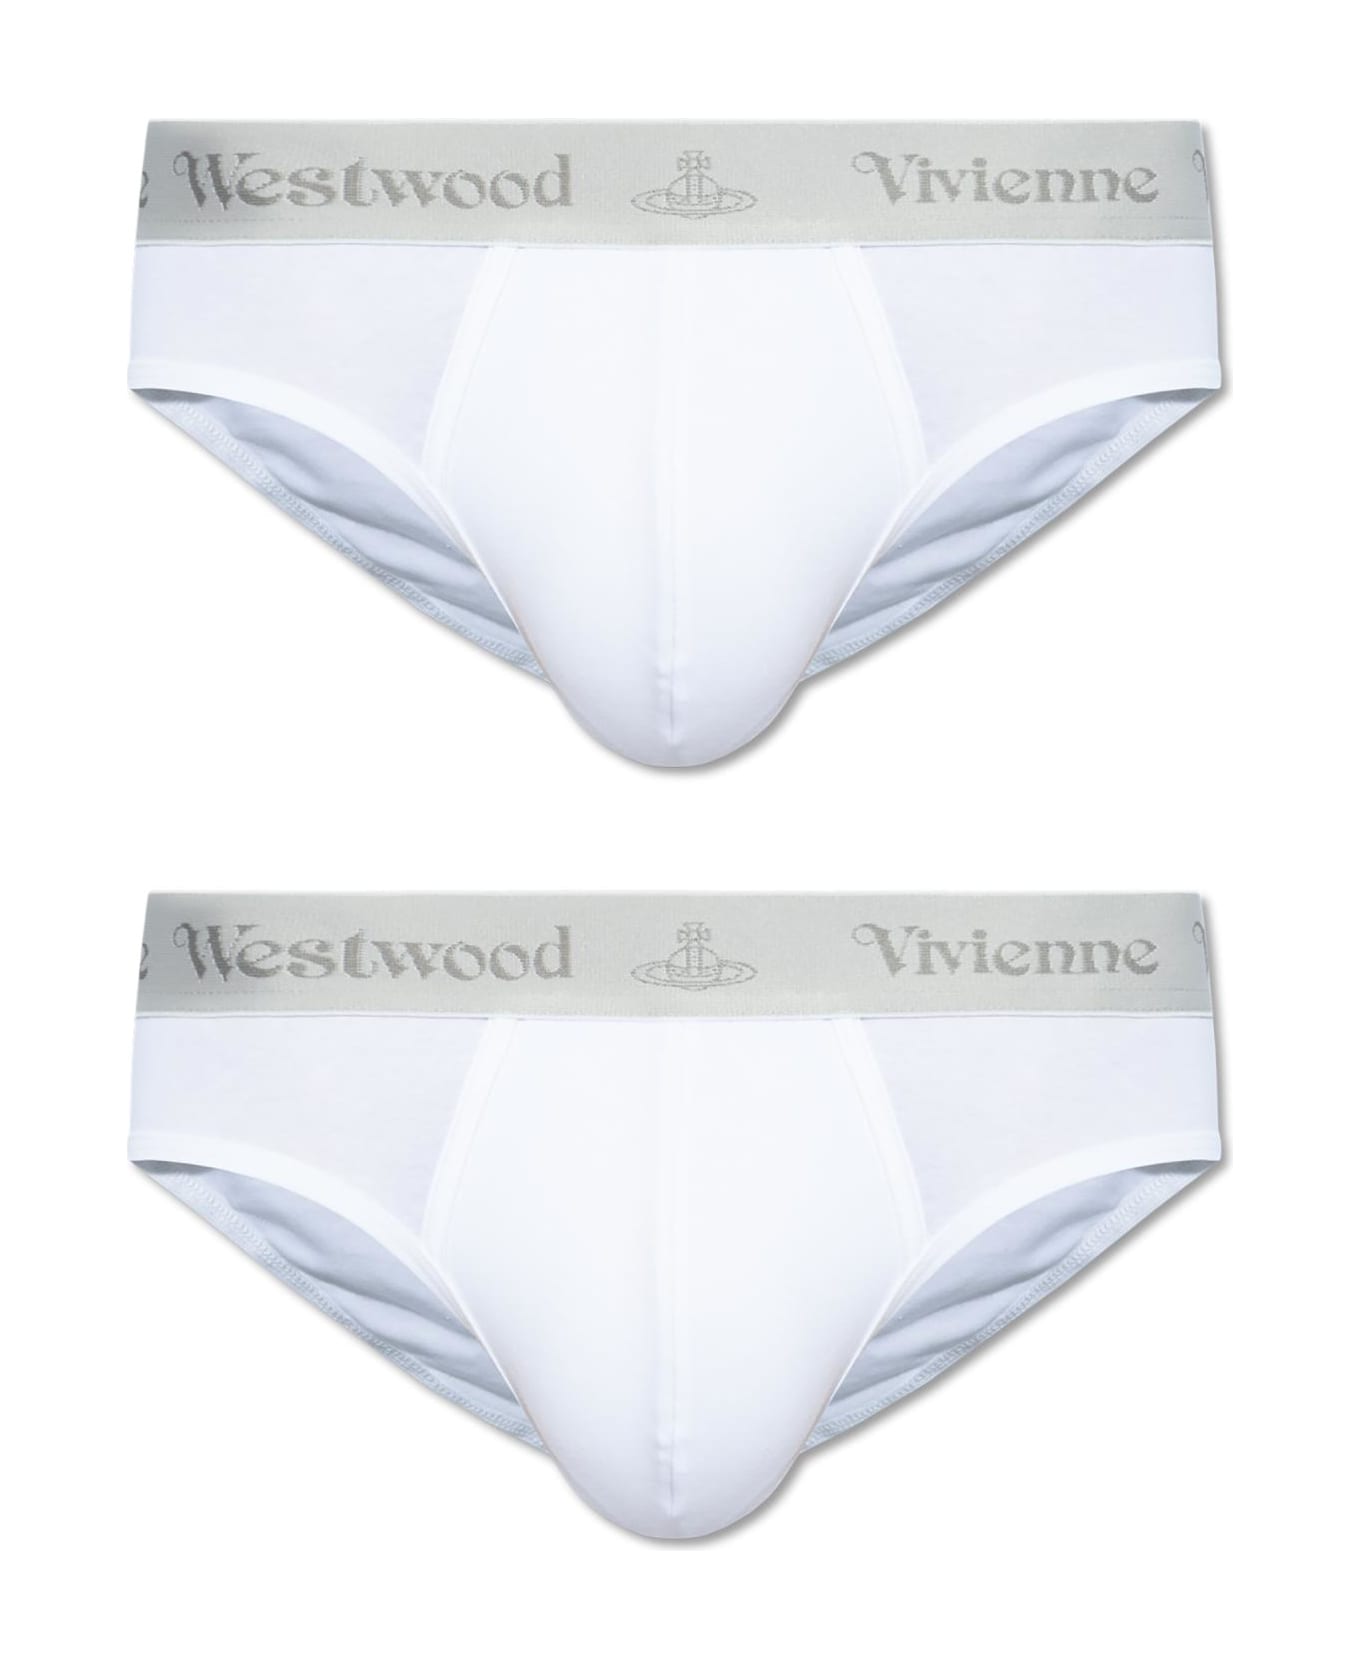 Vivienne Westwood Two-pack Of Briefs - WHITE ショーツ